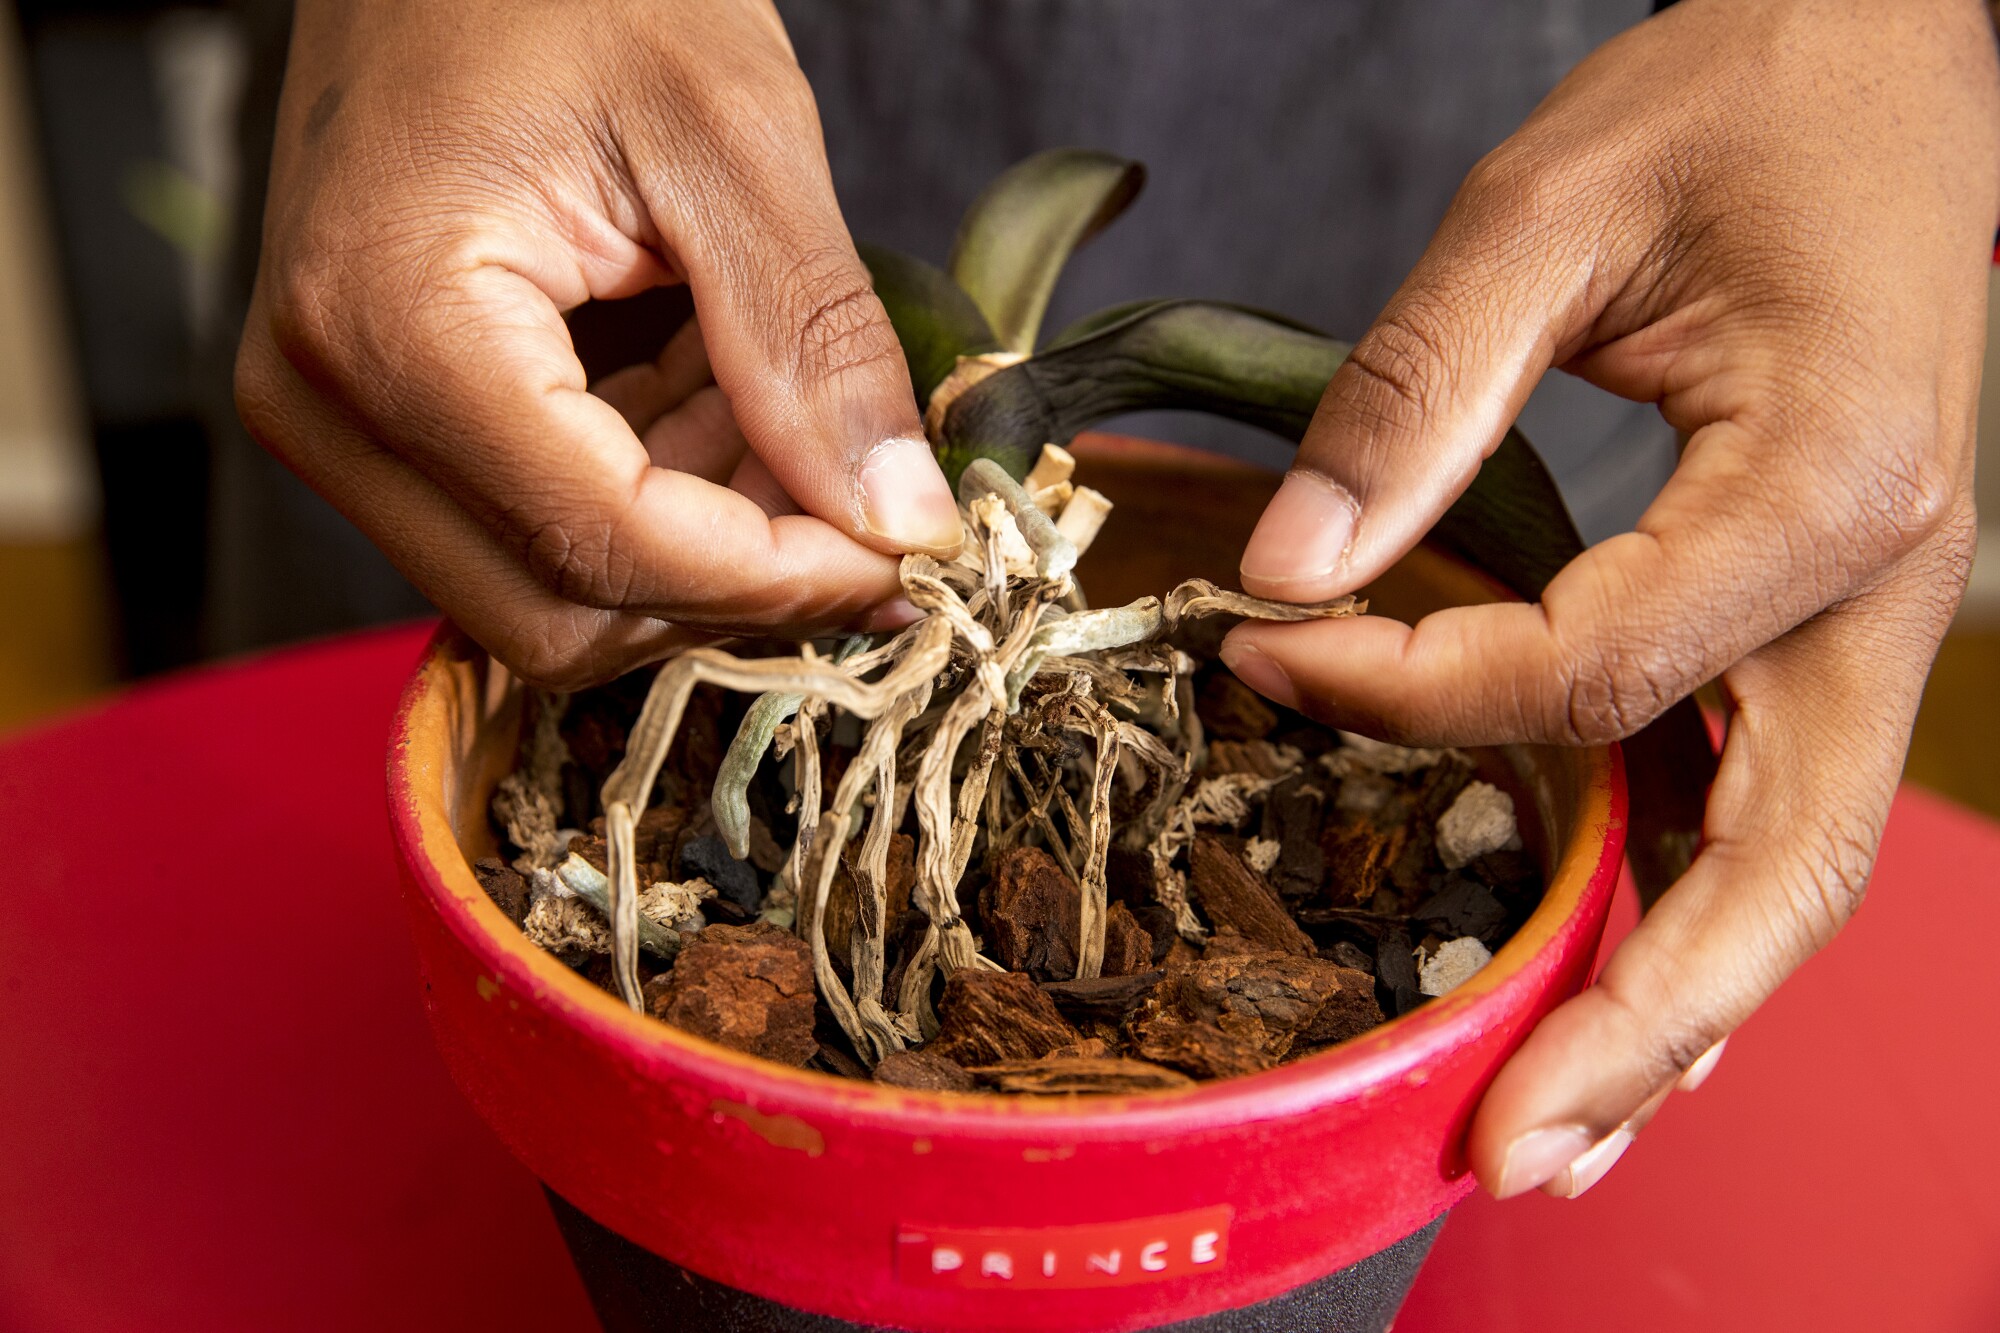 Hands separating the dead roots of an orchid in a red pot.